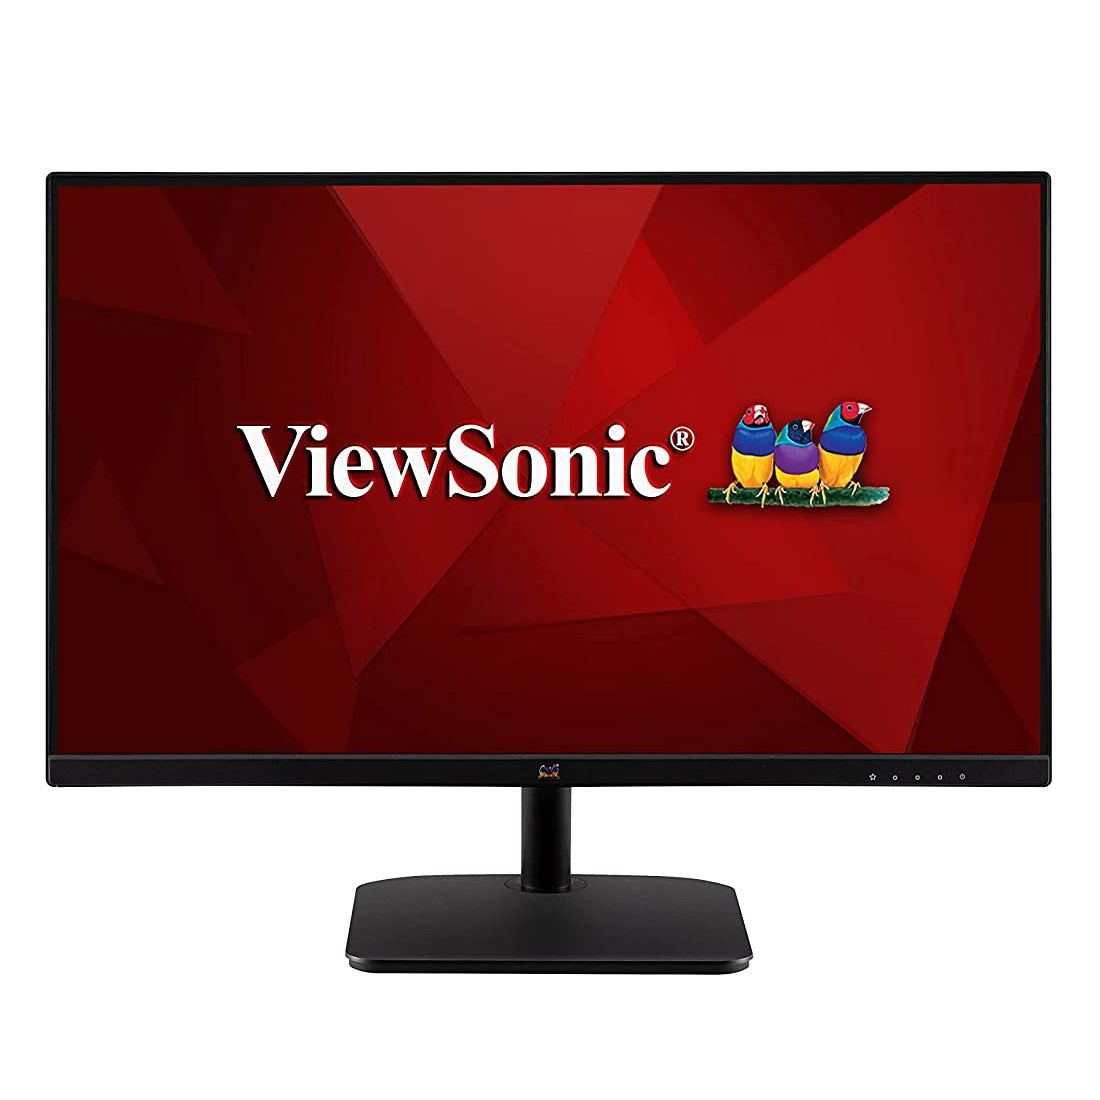 ViewSonic VA2432-MHD 24-inch Full HD IPS Monitor with 2W Dual Speakers and Eye Care Technologies